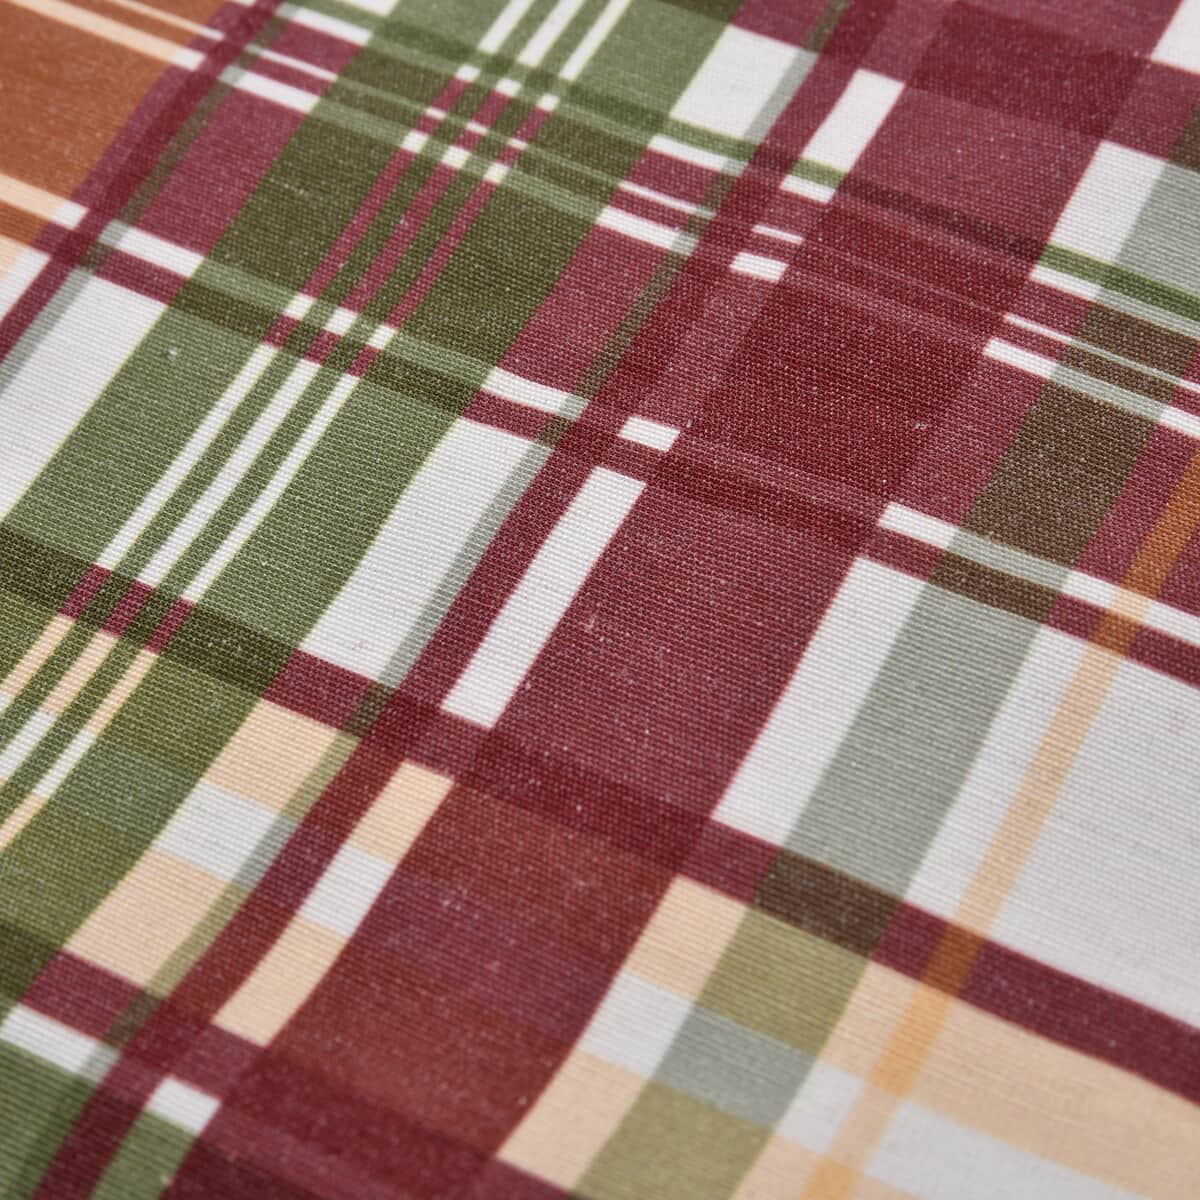 Homesmart Set of 4 Placemats and Table Runner For 4 Seater Dinning Table, 4 Washable Wrinkle Resistant Placemats  and Table Runner - Plaid Pattern image number 6